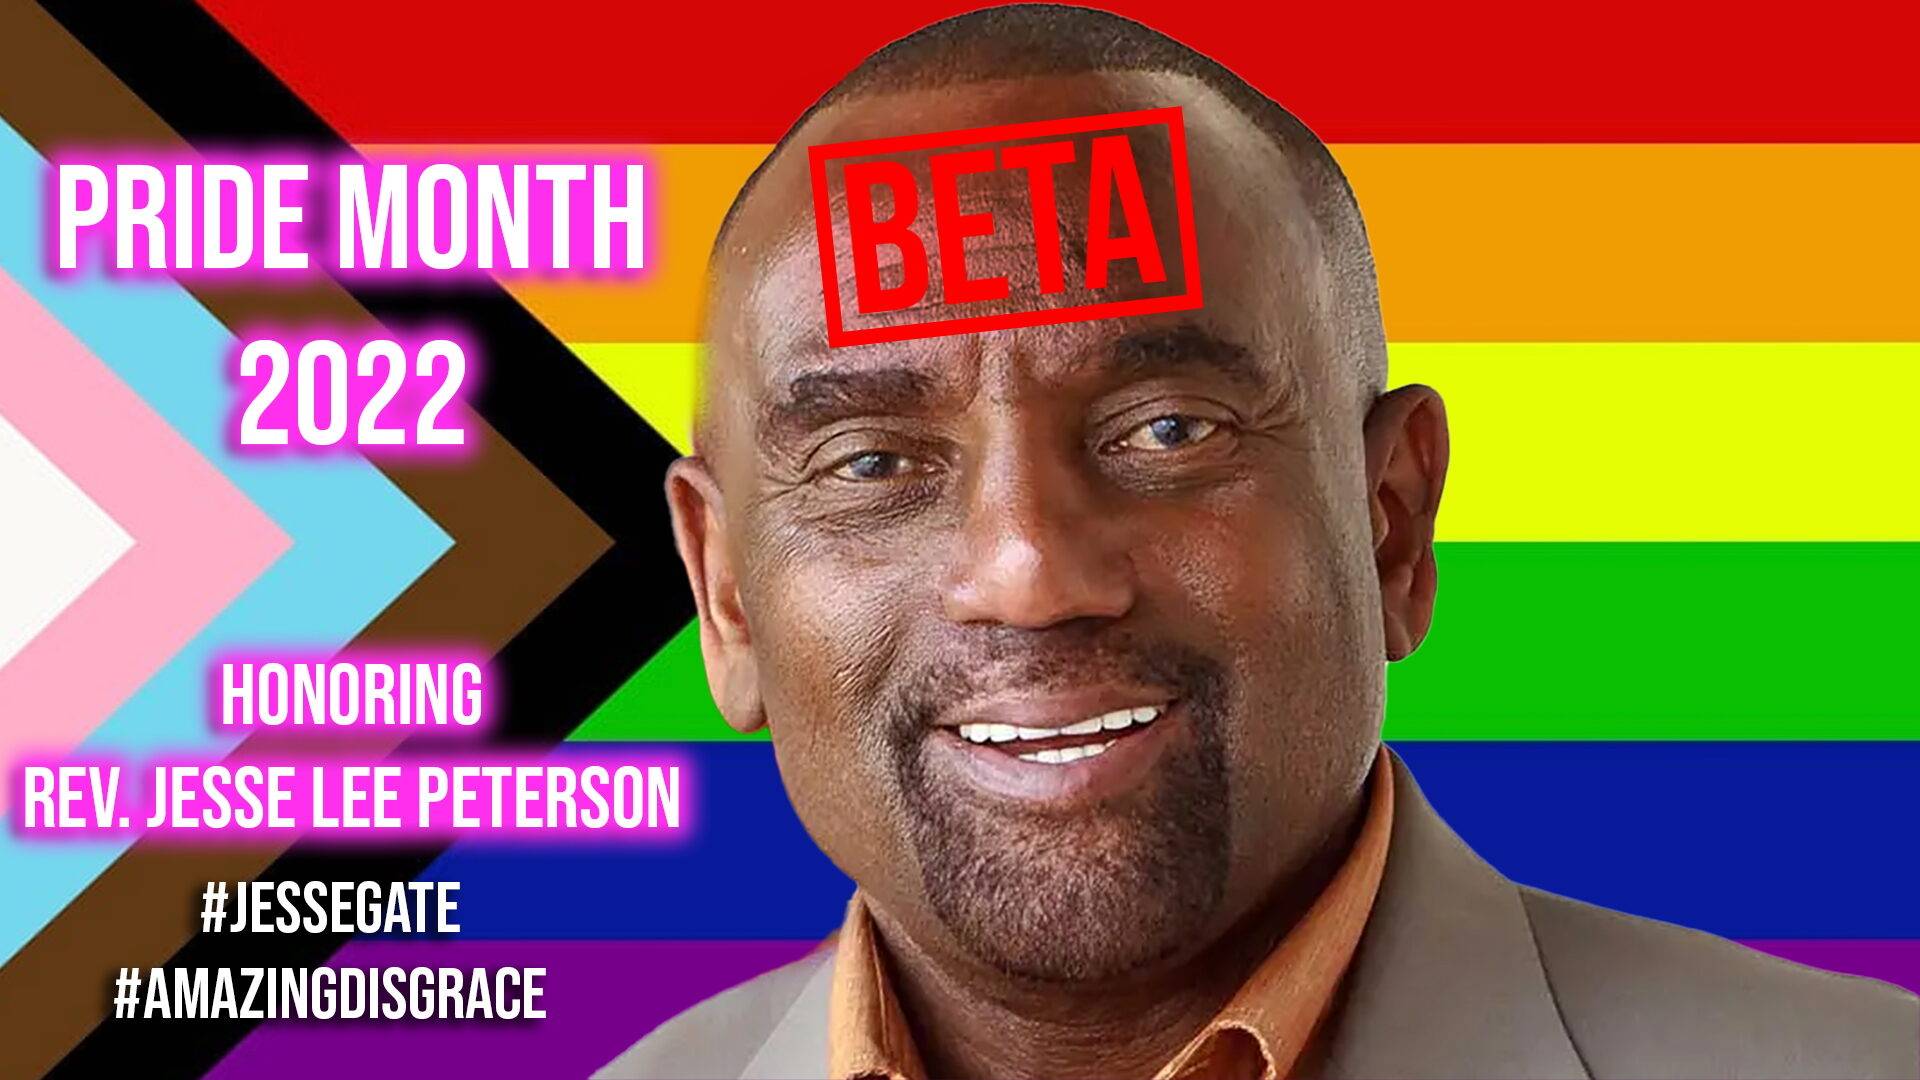 Infamous Gay-Basher Reverend Jesse Lee Peterson Exposed as Homosexual Super Predator